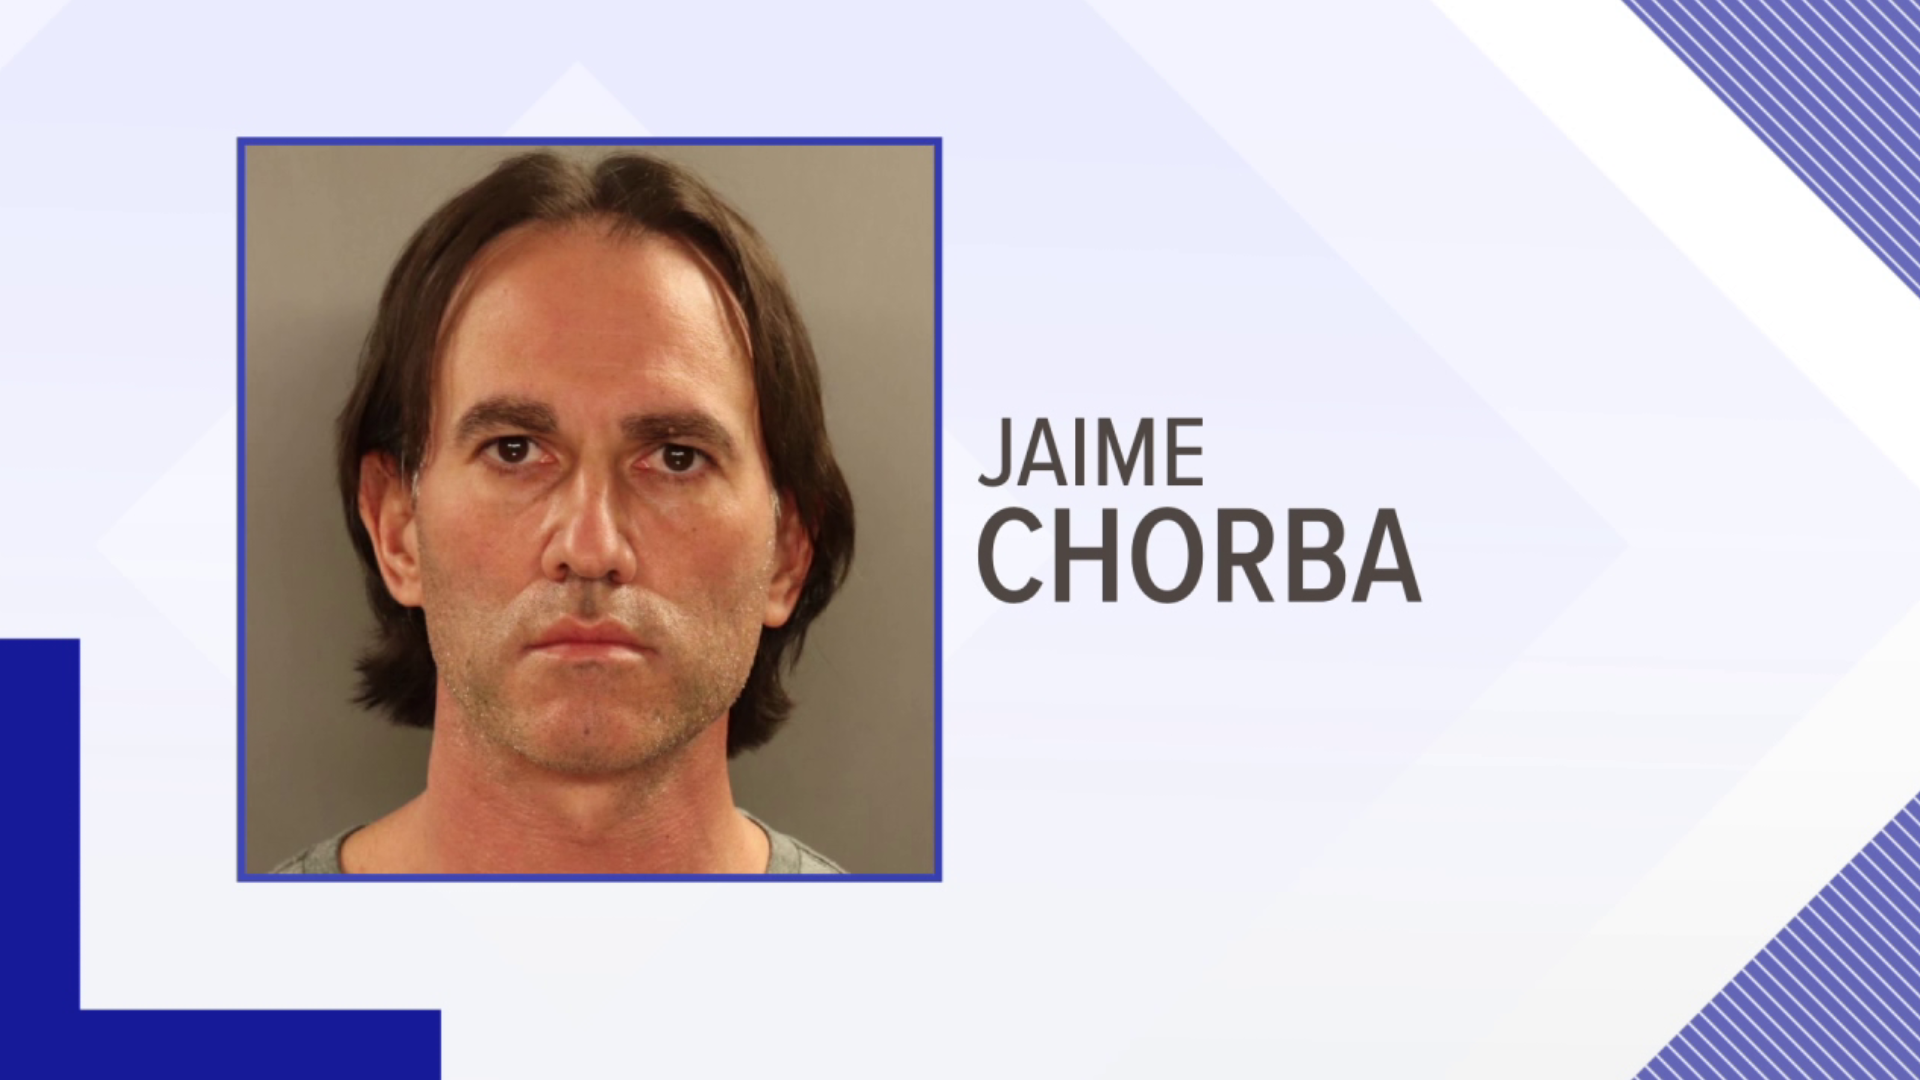 Chorba is facing several charges, including possession of child pornography.